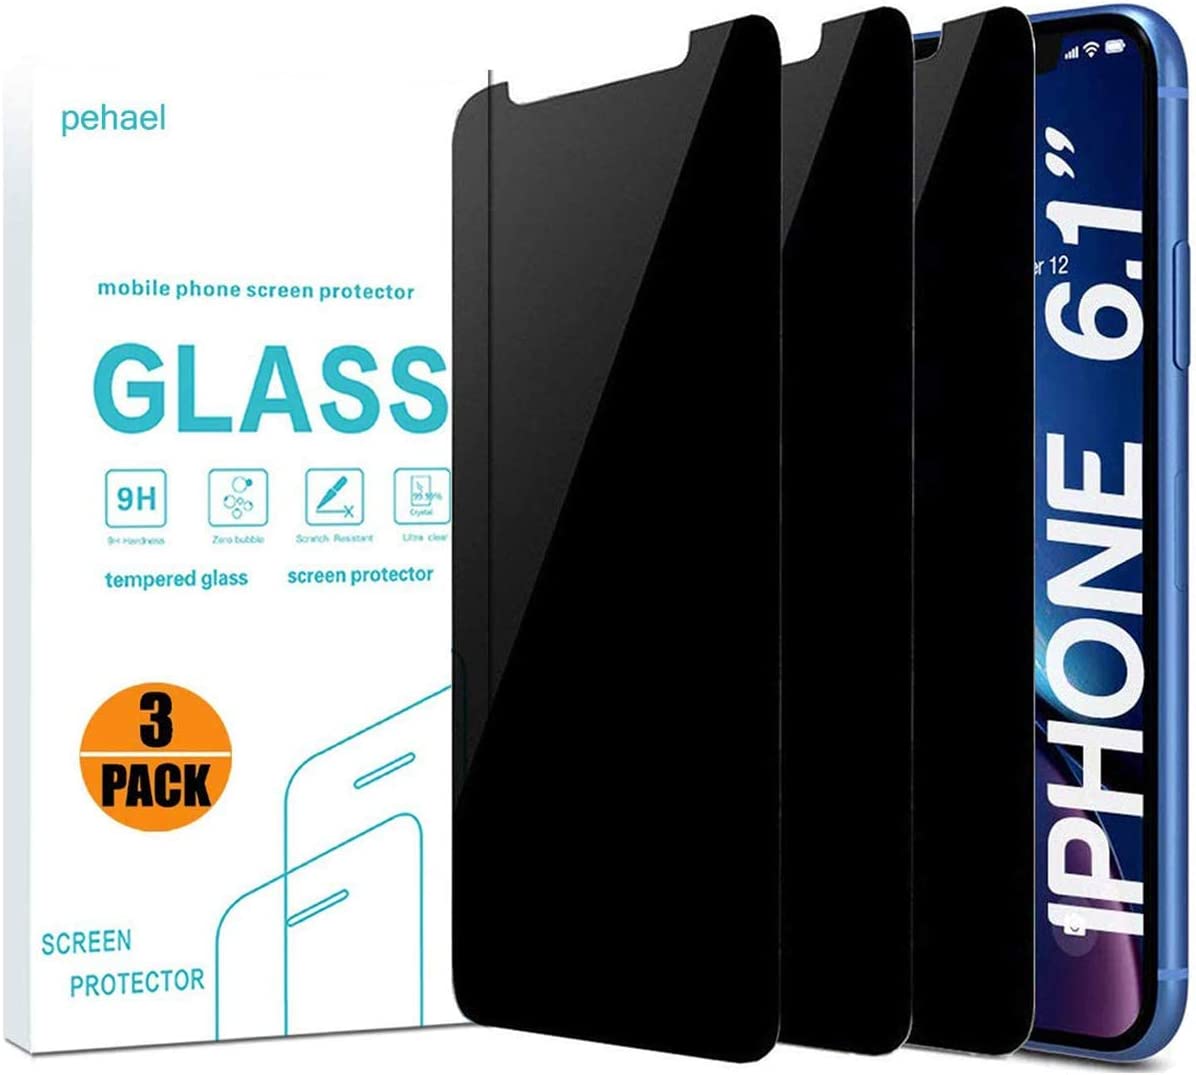 iPhone 6s privacy screen protector, best privacy screen protector